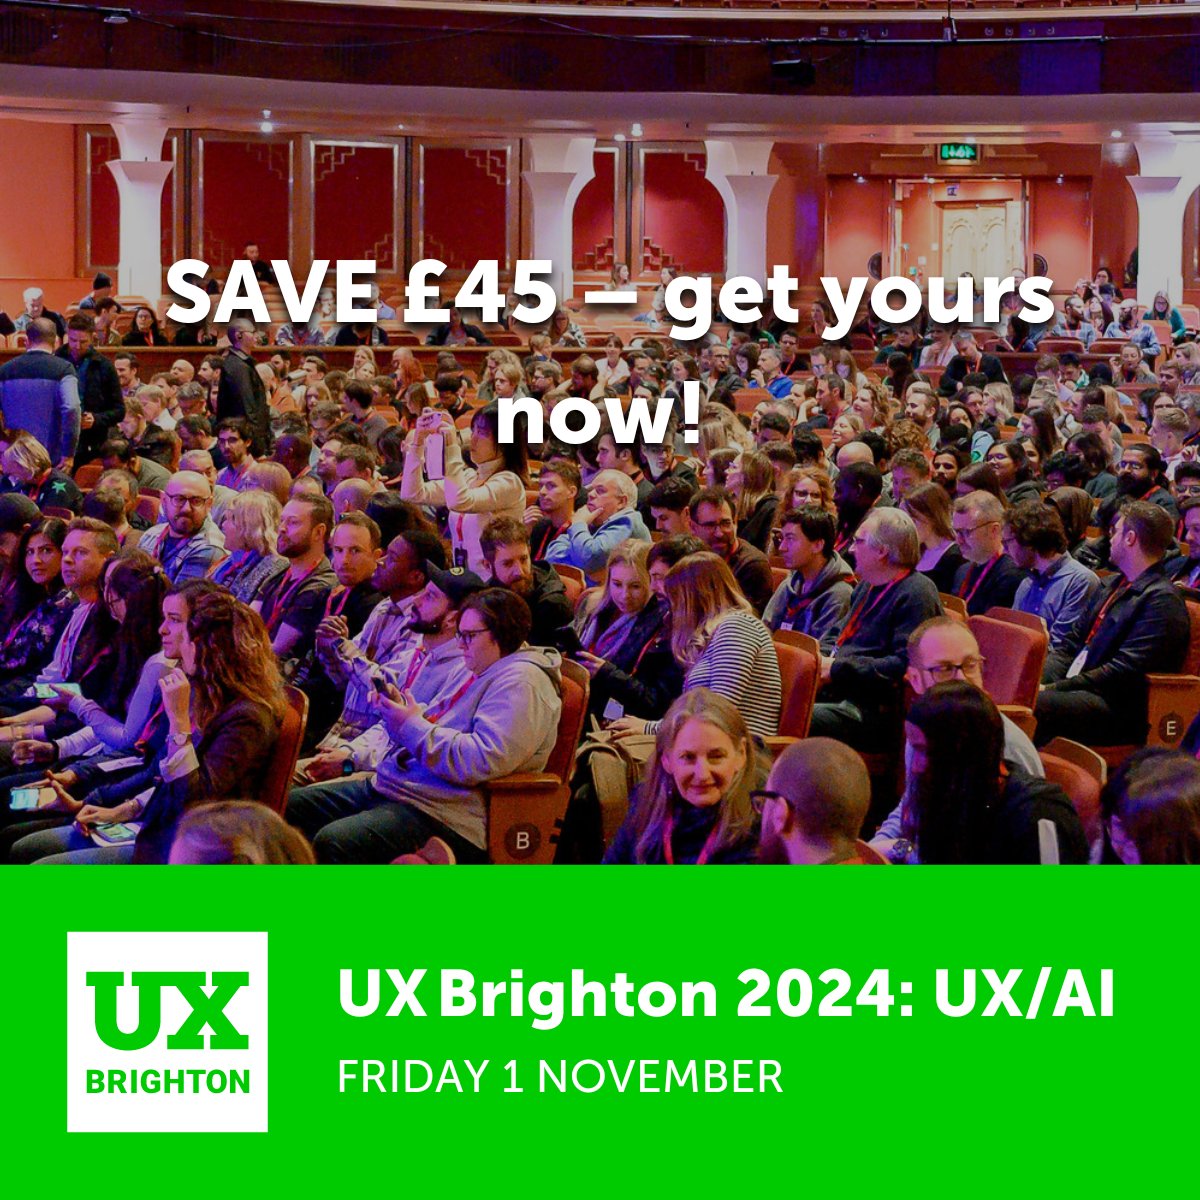 🚀 @LloydsBank is ready for UX Brighton 2024 - UX & AI - Are you? 🌟 Join industry leaders and save £45 with our Early Bird offer! You can still catch unbeatable insights and networking at UX Brighton 2024. Don’t miss out! 📅 Save now: uxbri.org #UXBrighton2024…